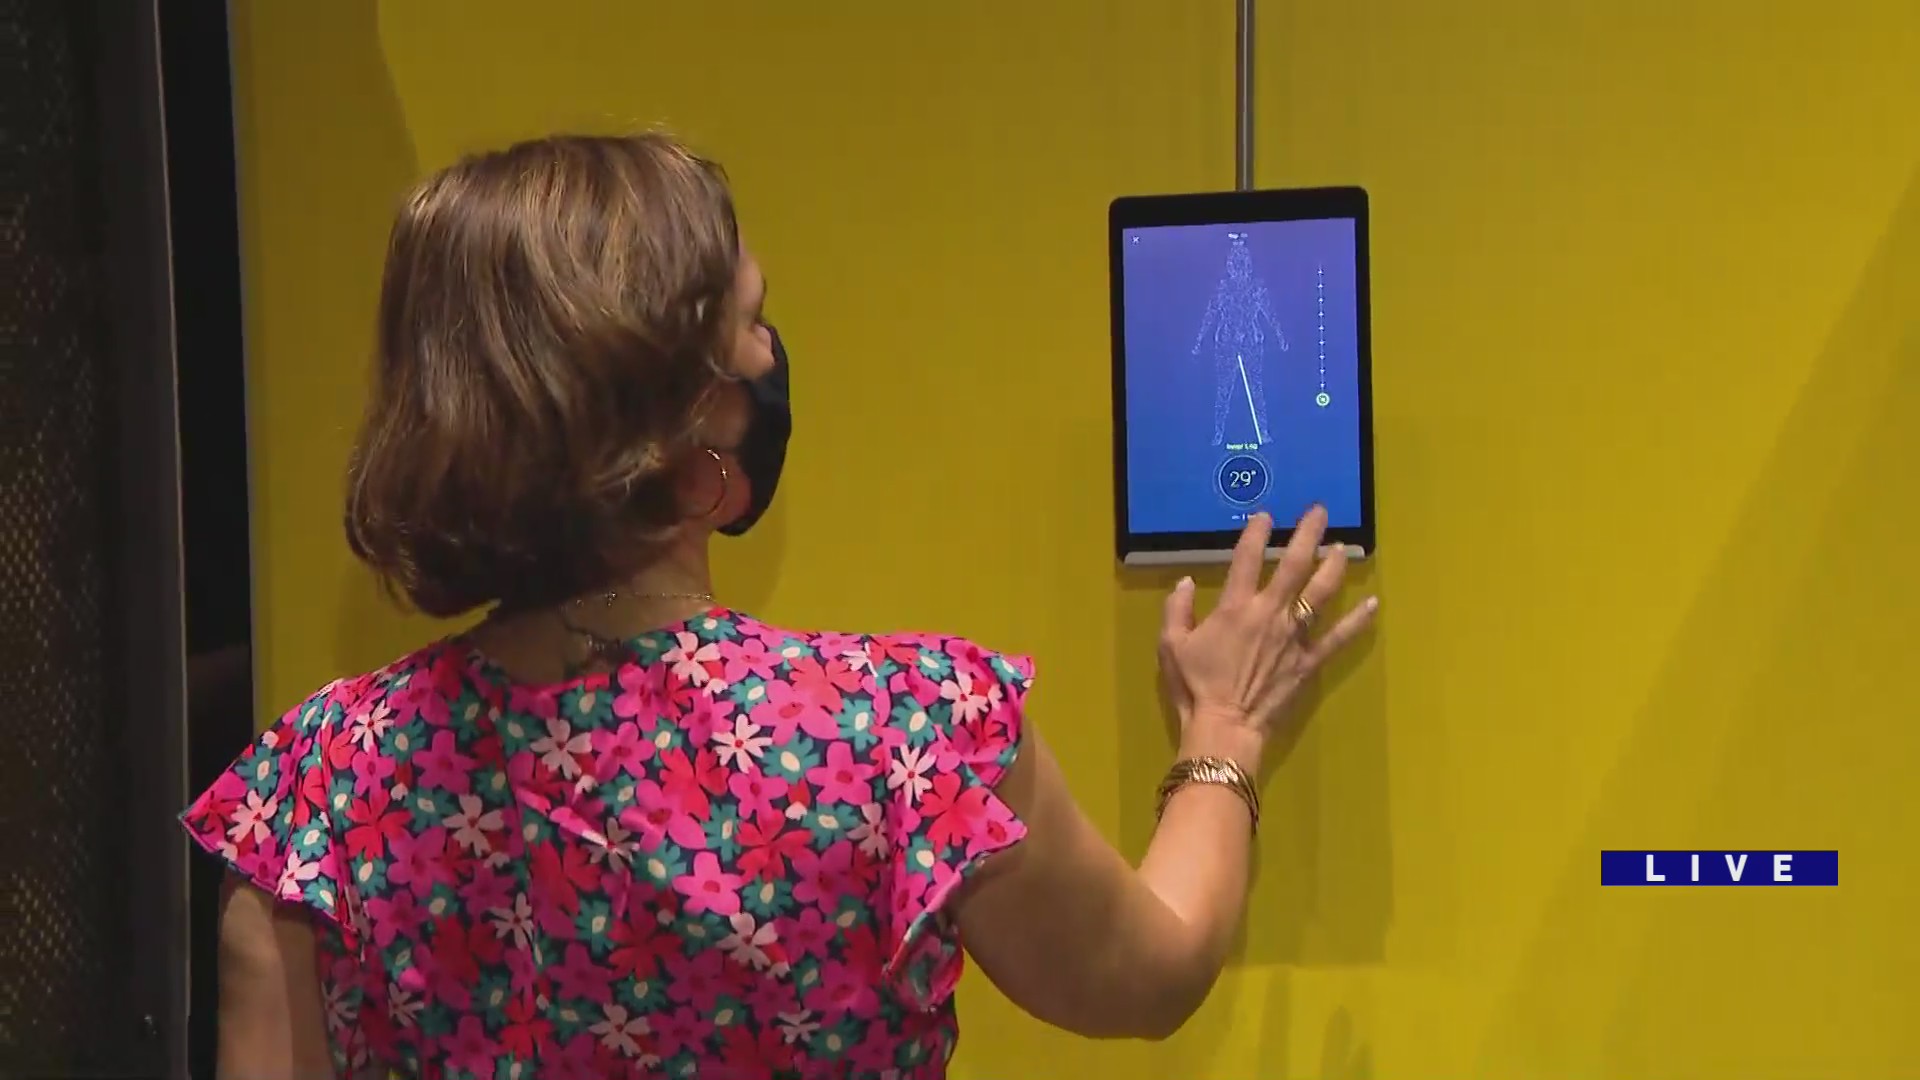 Around Town checks out the latest 3D measurement technology for apparel shopping at Fit:Match